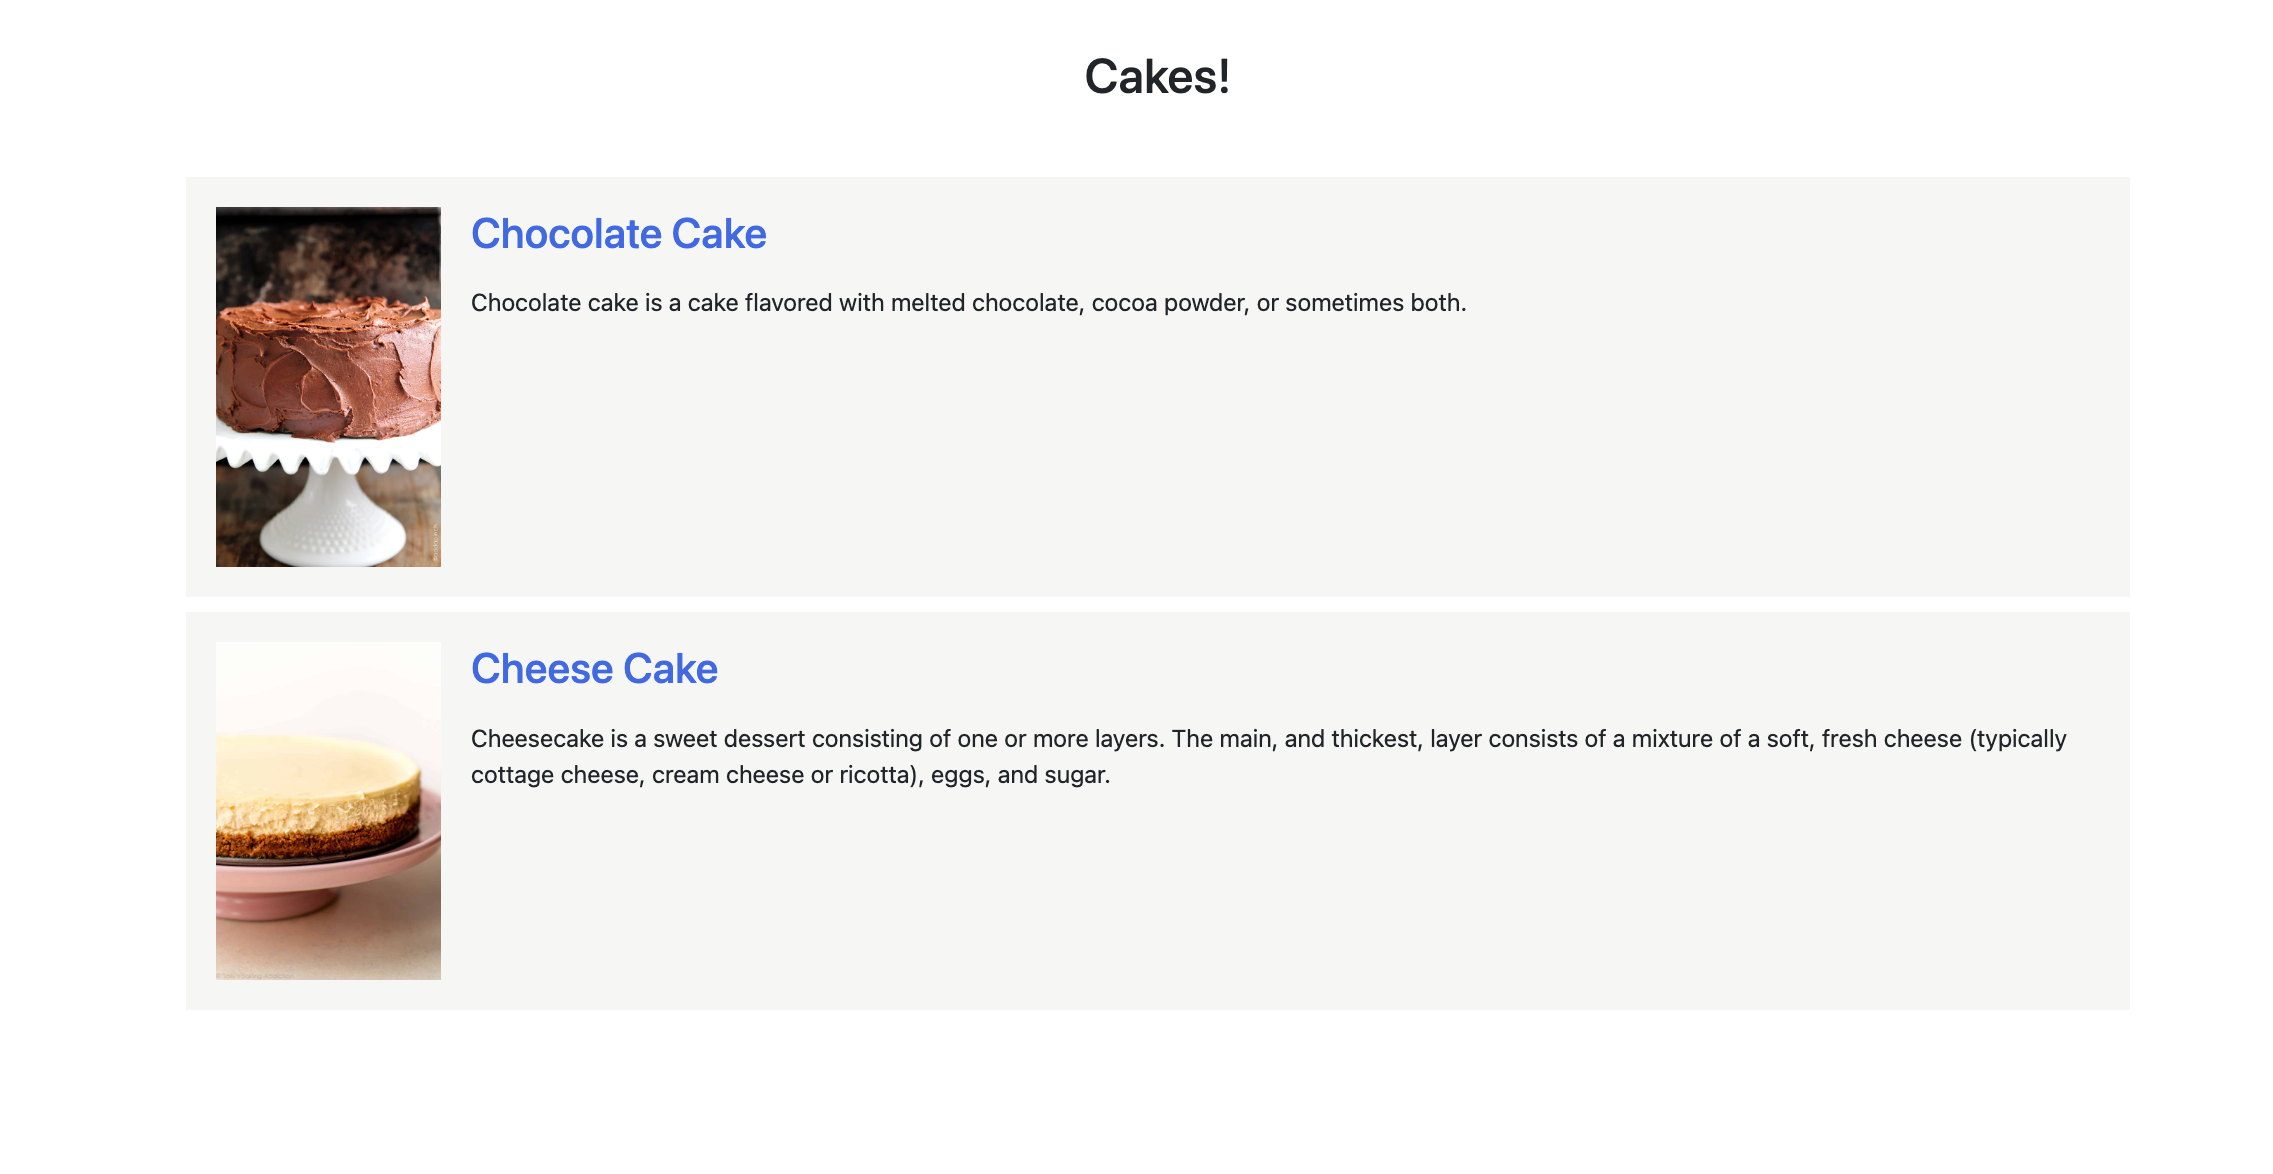 Bakery application displaying a list of cakes